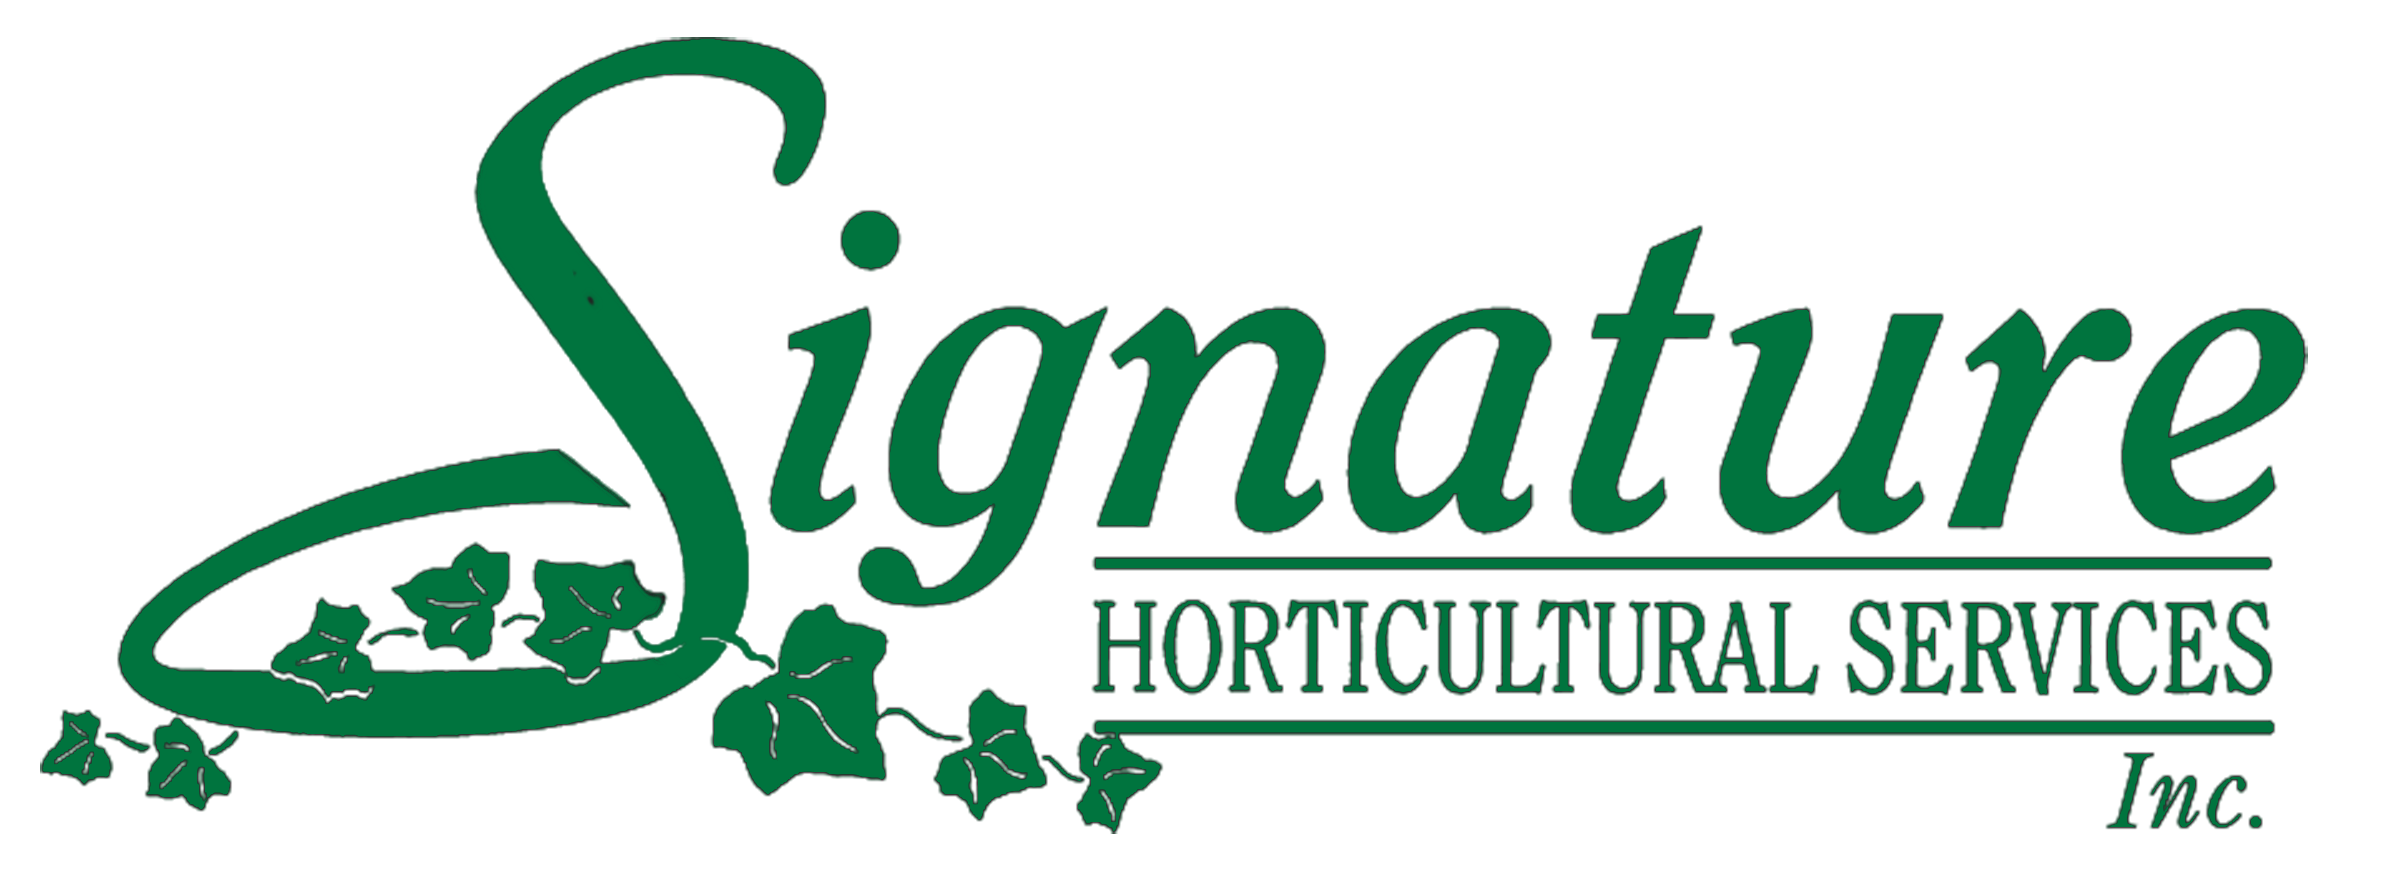 Signature Horticultural Services Maryland